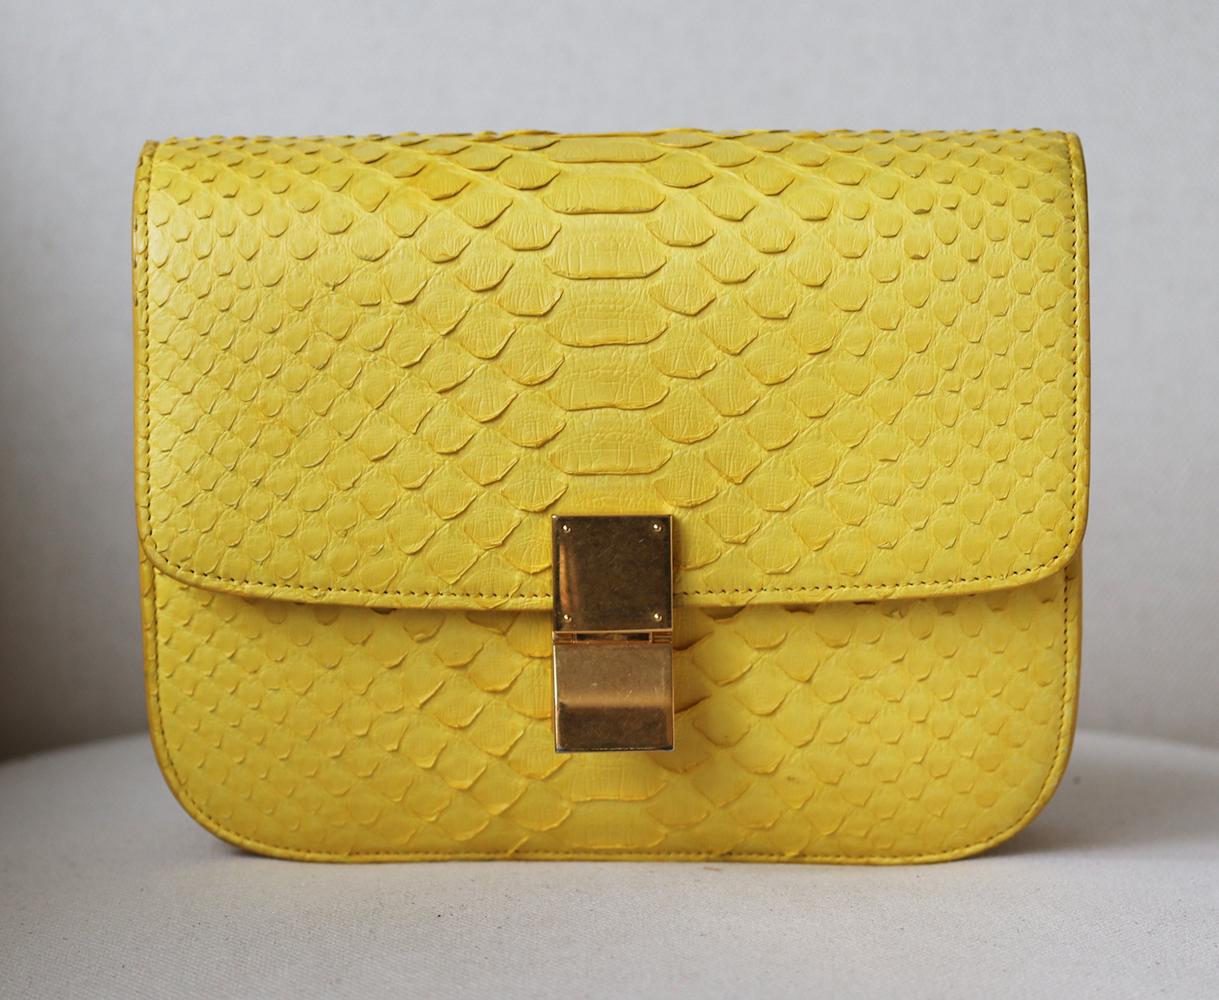 This shoulder bag has been made in France from bright-yellow python-leather with Celine's iconic gold-tone fastening.
The pushlock fastening opens to reveal a yellow leather interior. 
Can be carried by its python leather and leather strap.
Yellow